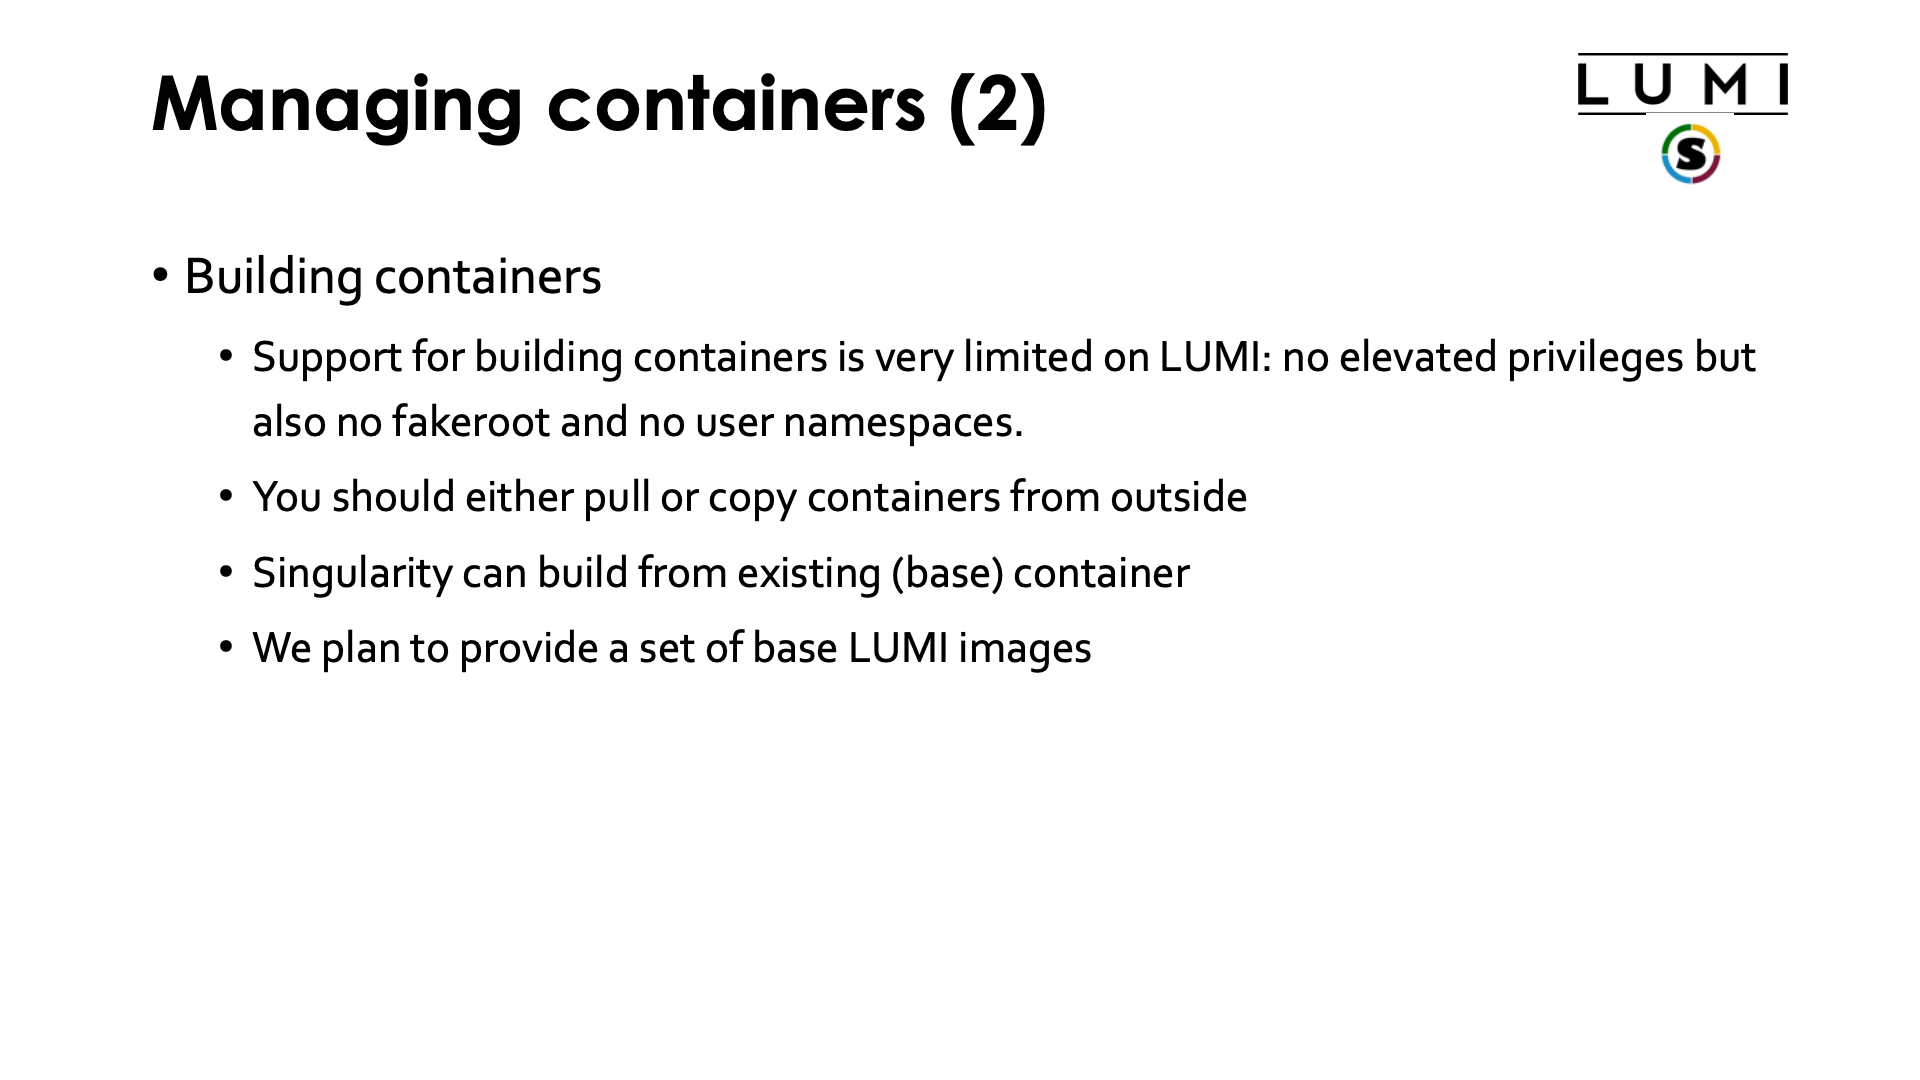 Managing containers (2)